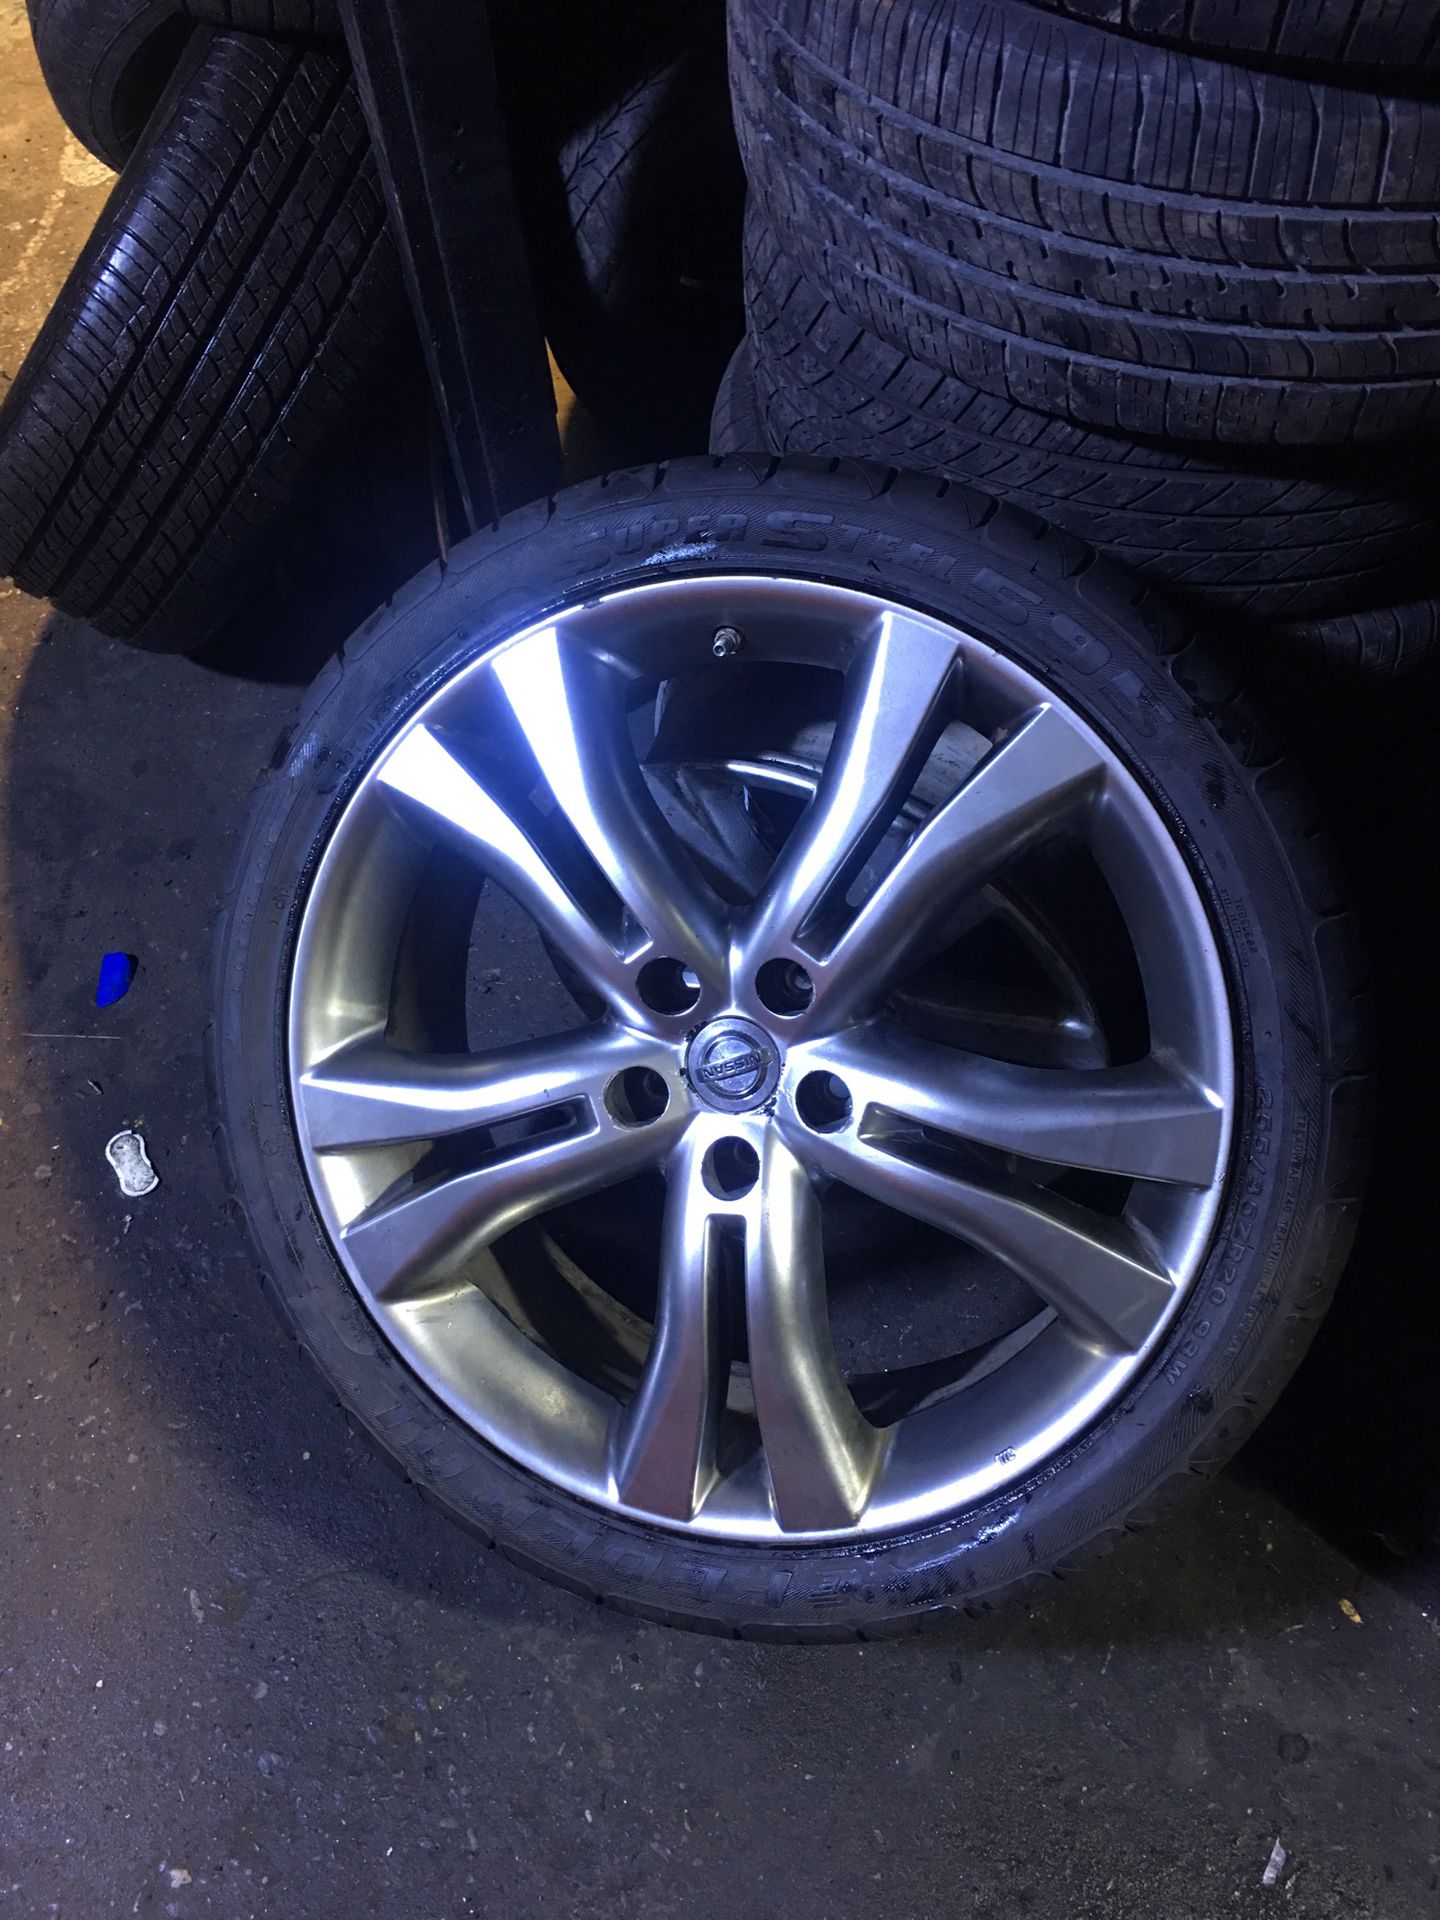 4- Nissan rims and tires 20”